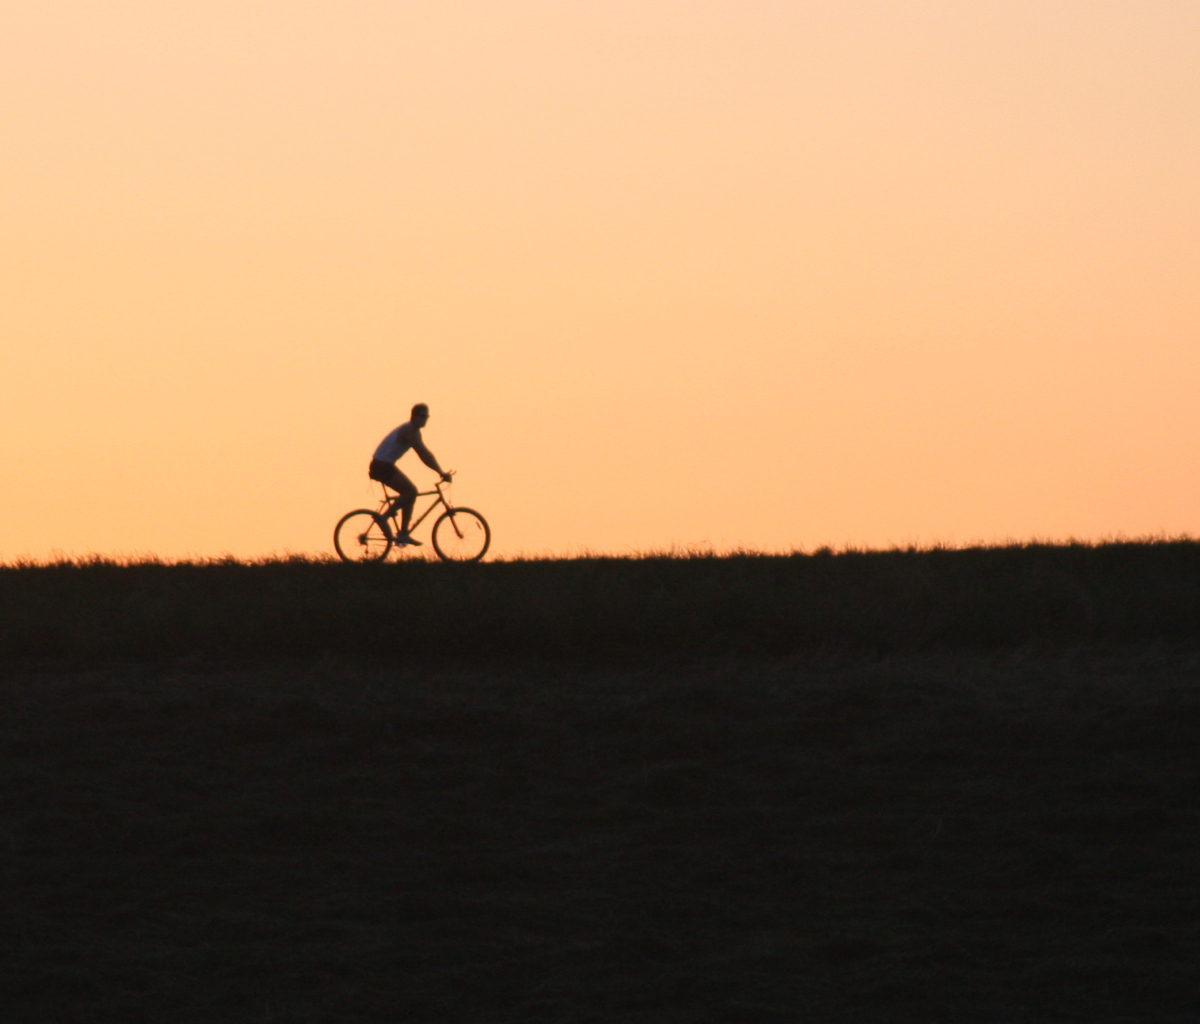 Bicycle Ride In Field wallpaper 1200x1024